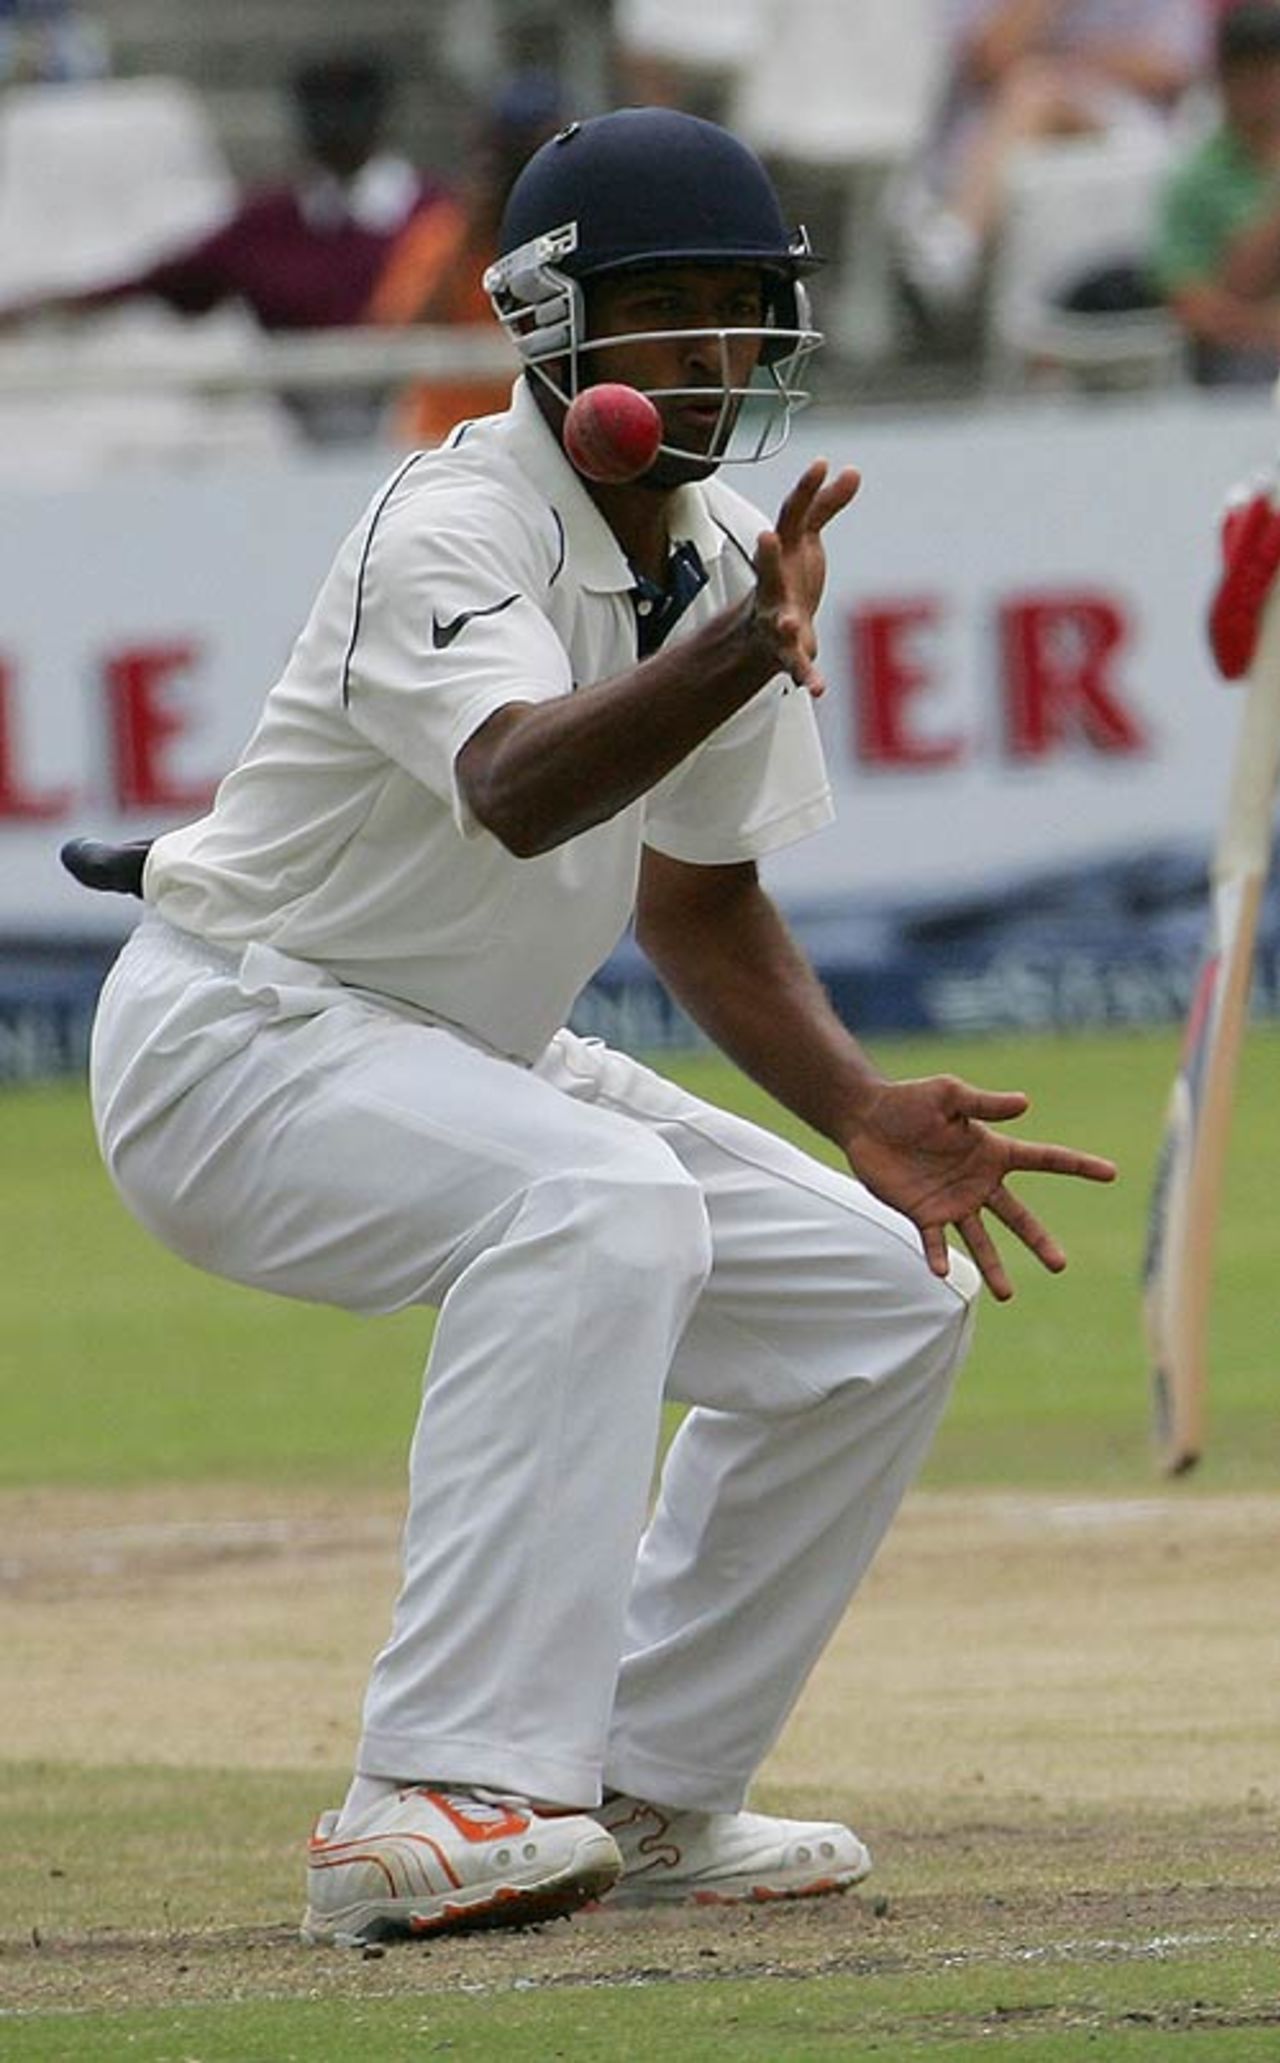 The ball whizzes past Wasim Jaffer at short leg, South Africa v India, 3rd Test, Cape Town, 5th day, January 6, 2007